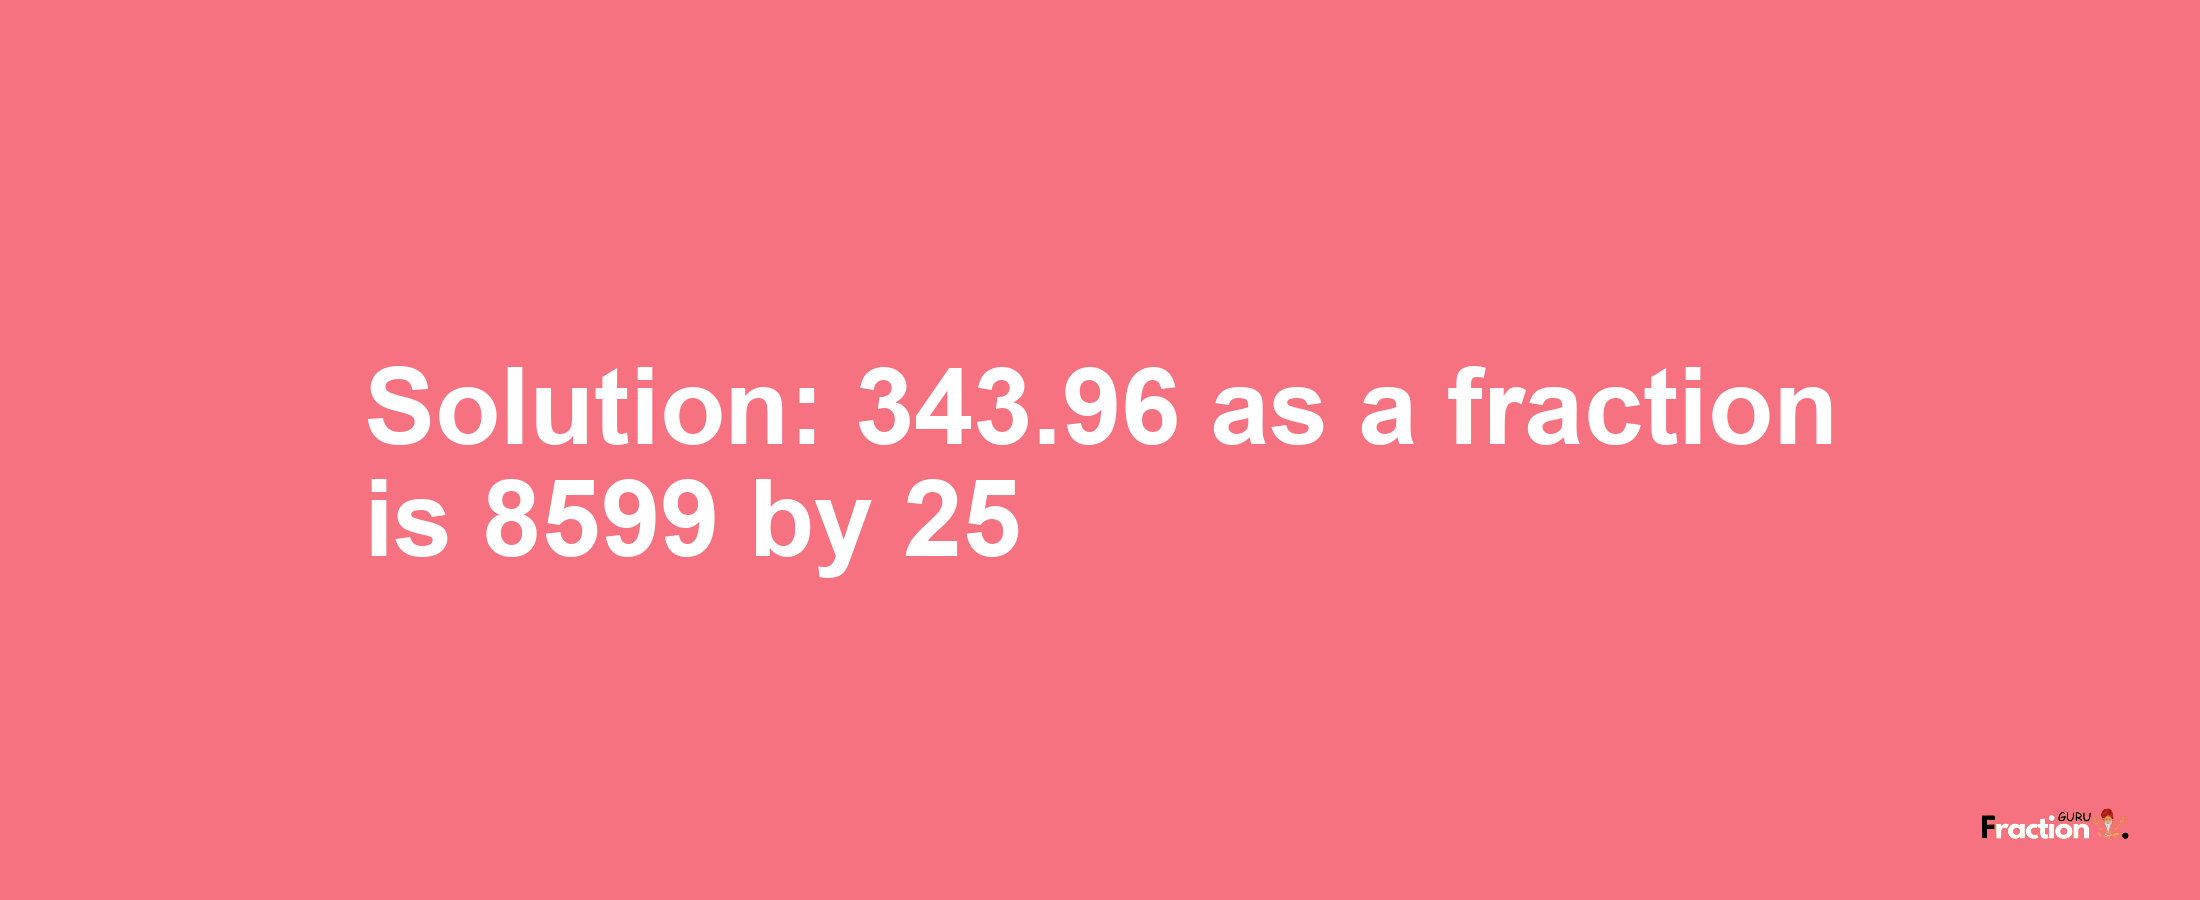 Solution:343.96 as a fraction is 8599/25